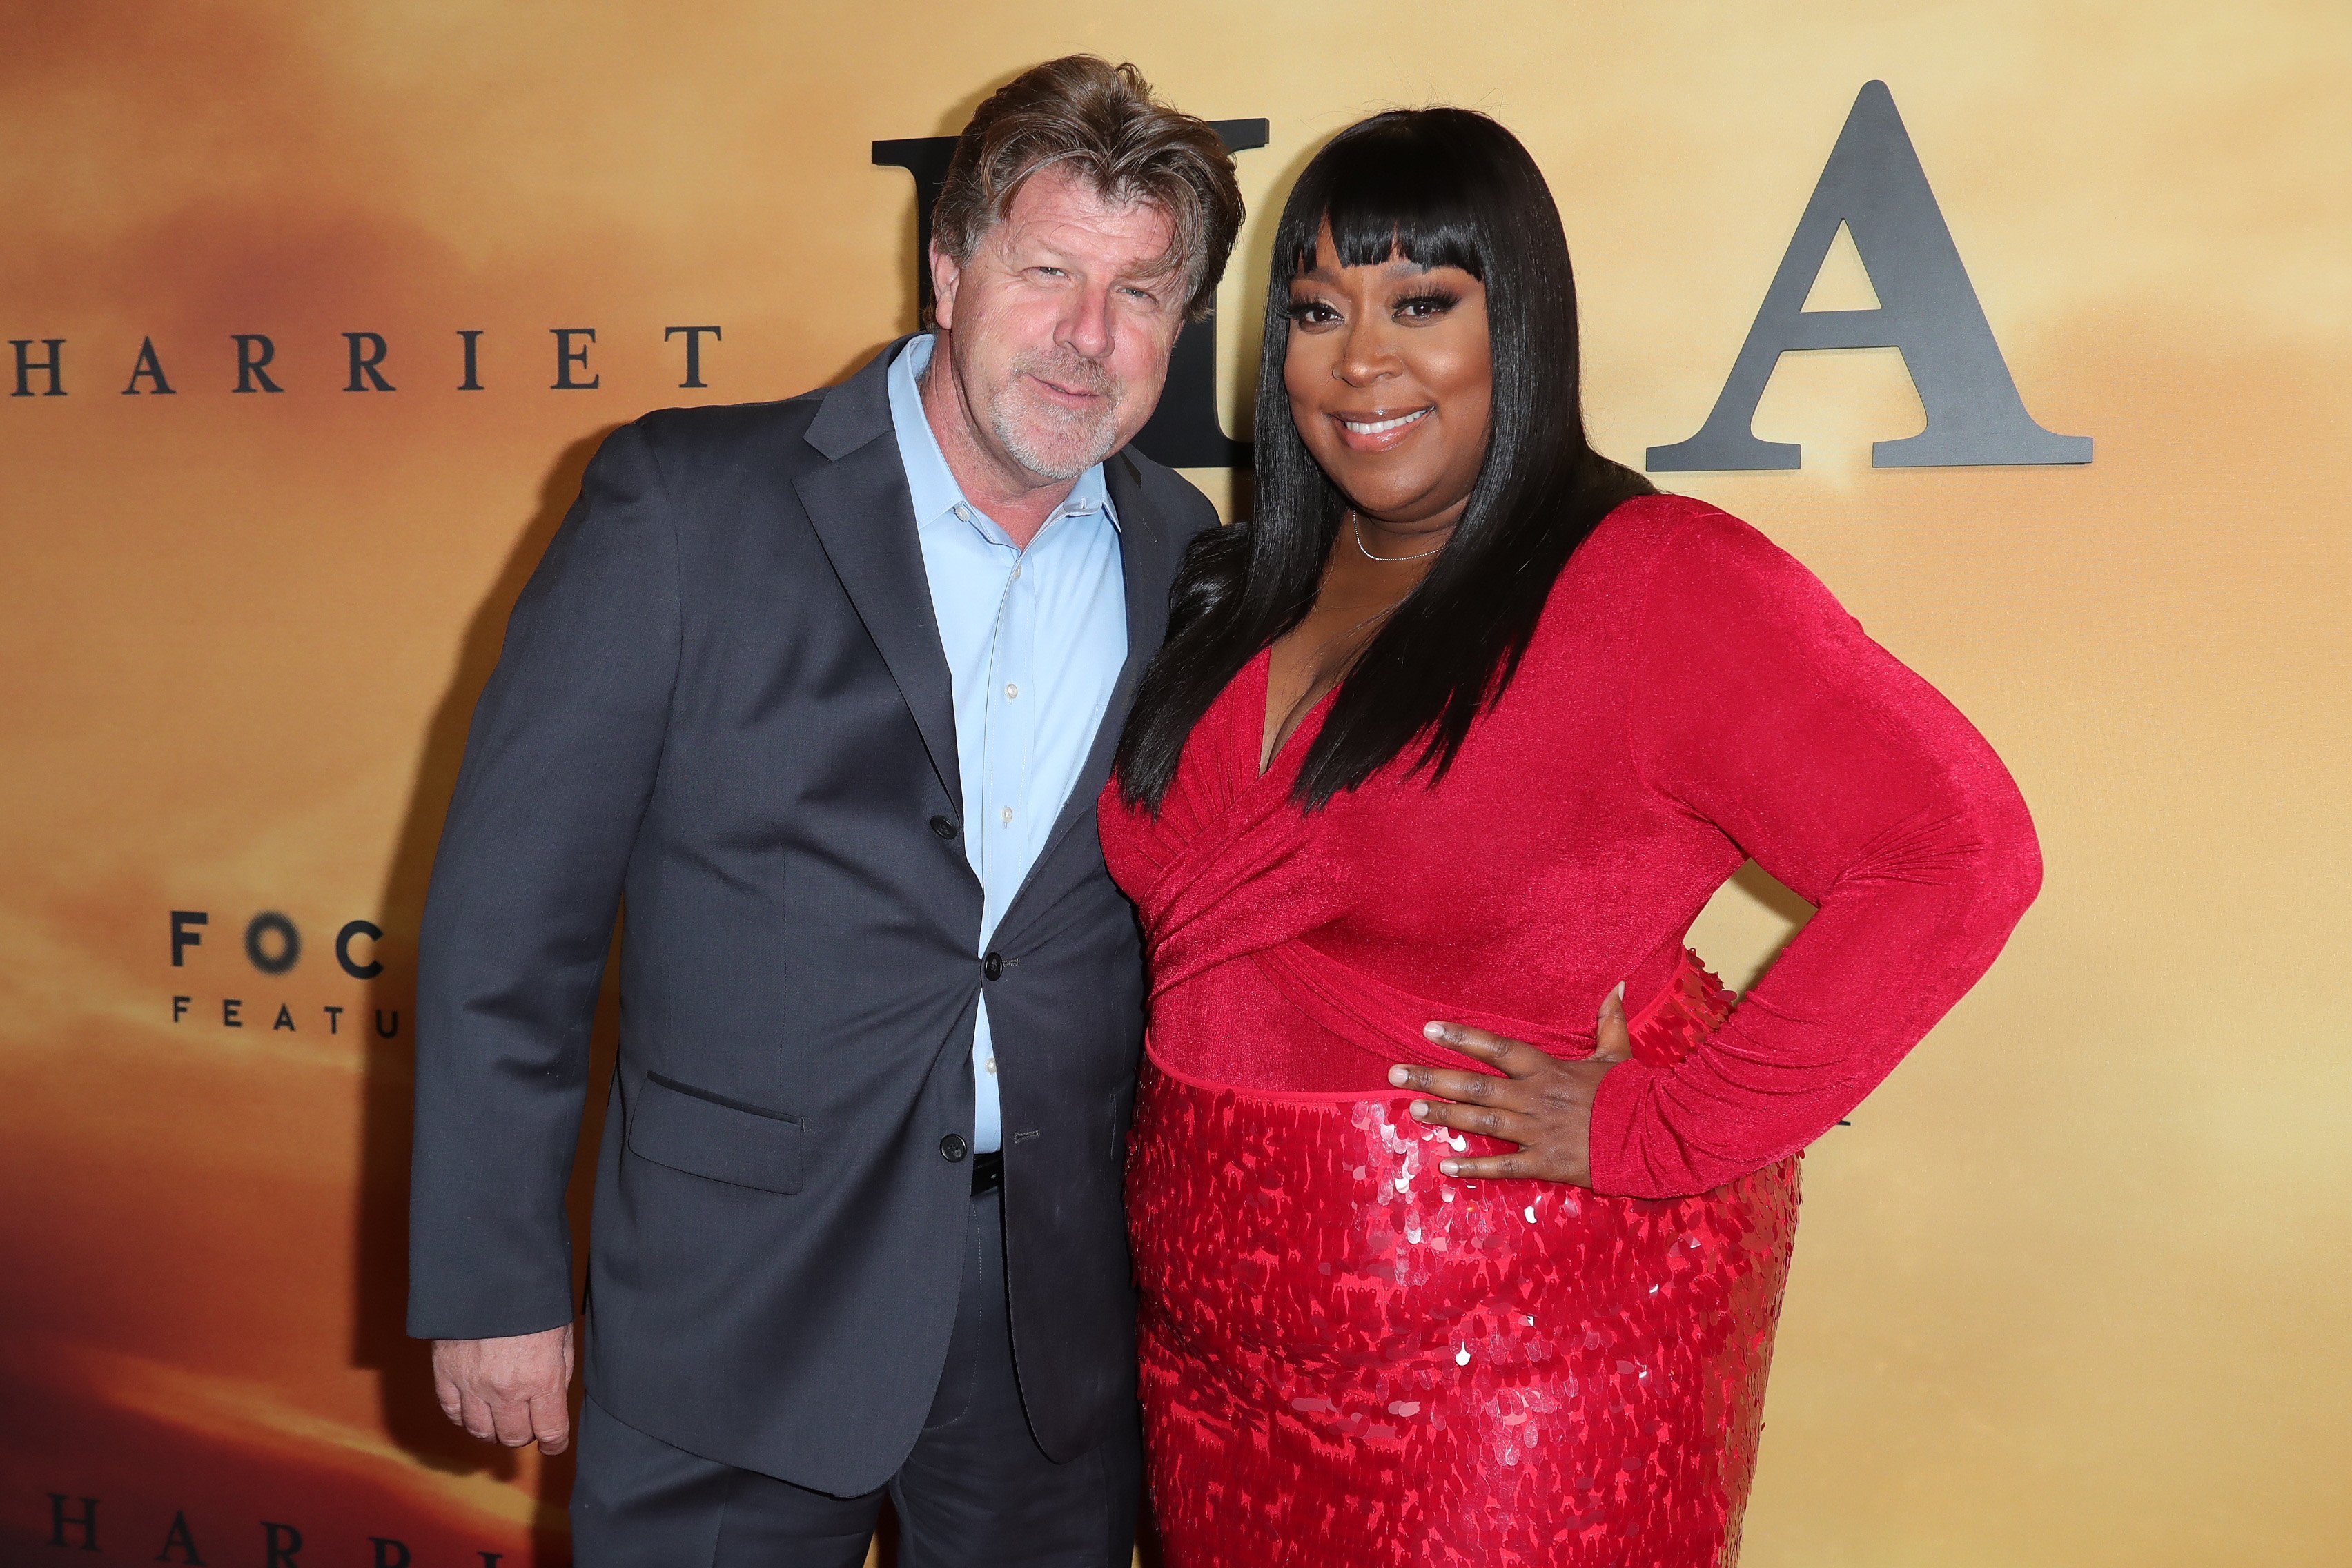 James Welch and Loni Love attend Premiere Of Focus Features' "Harriet" at The Orpheum Theatre | Photo: Getty Images